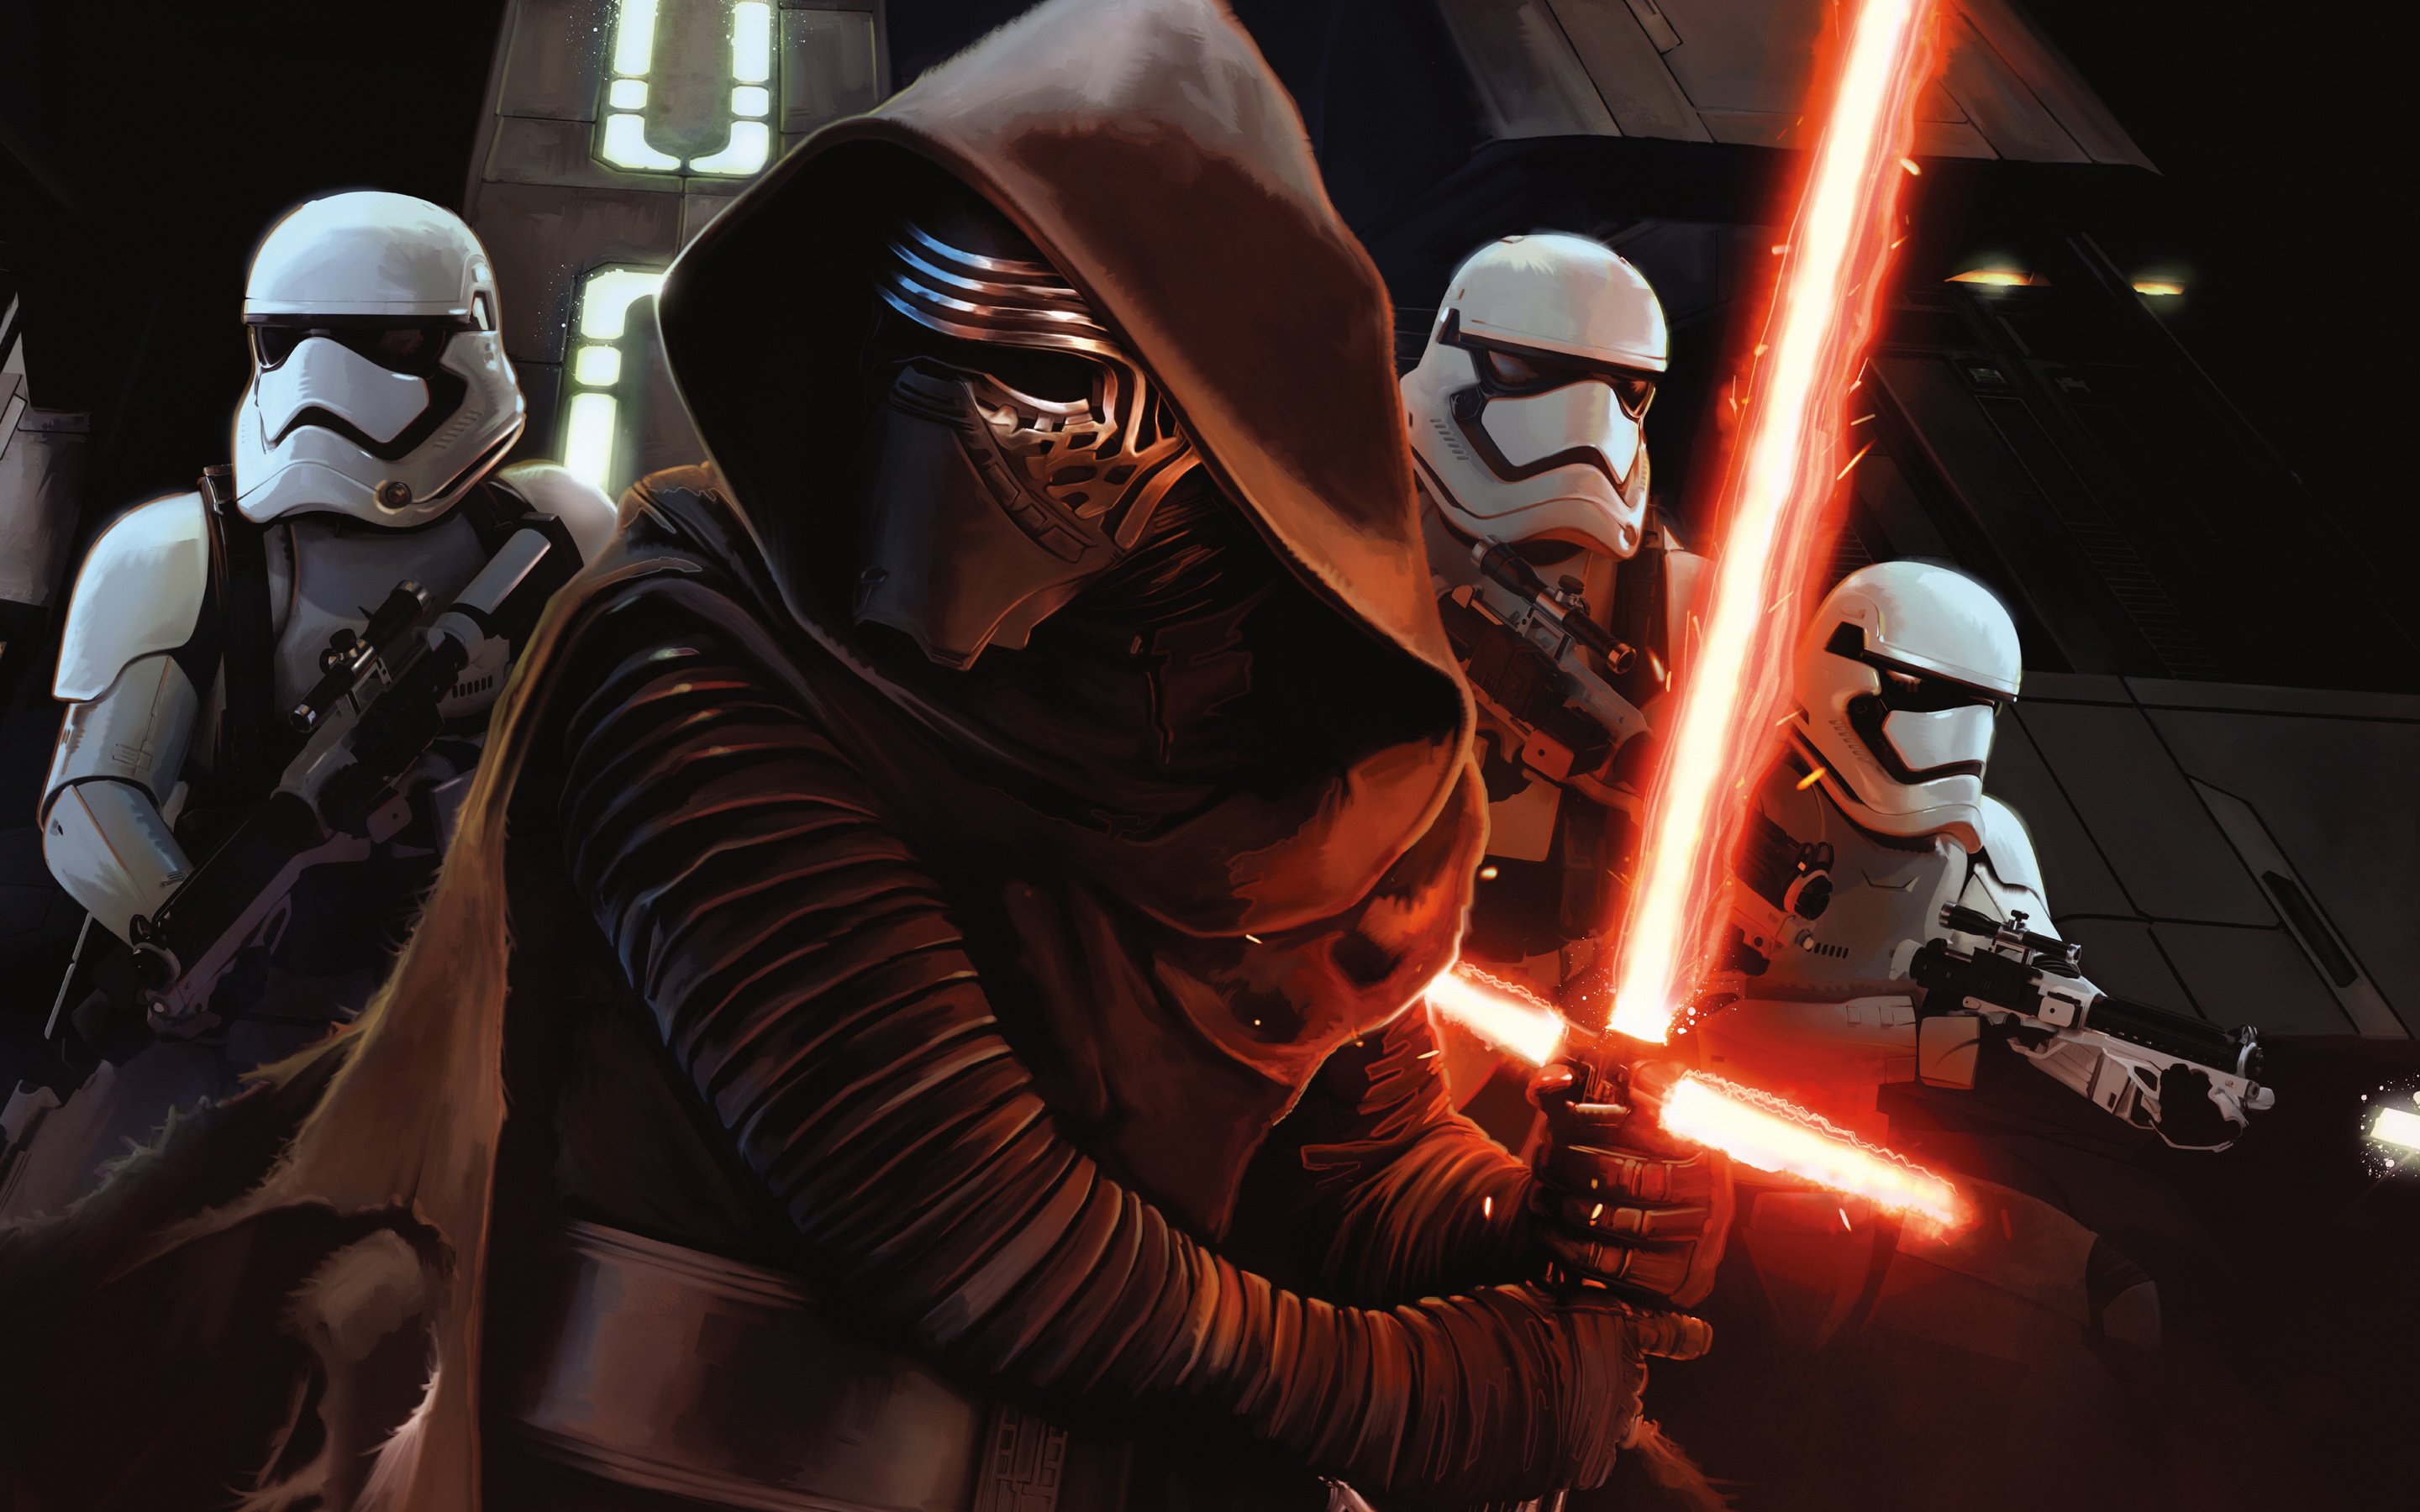 Star Wars Episode VII The Force Awakens Wallpapers HD Wallpapers 2880x1800